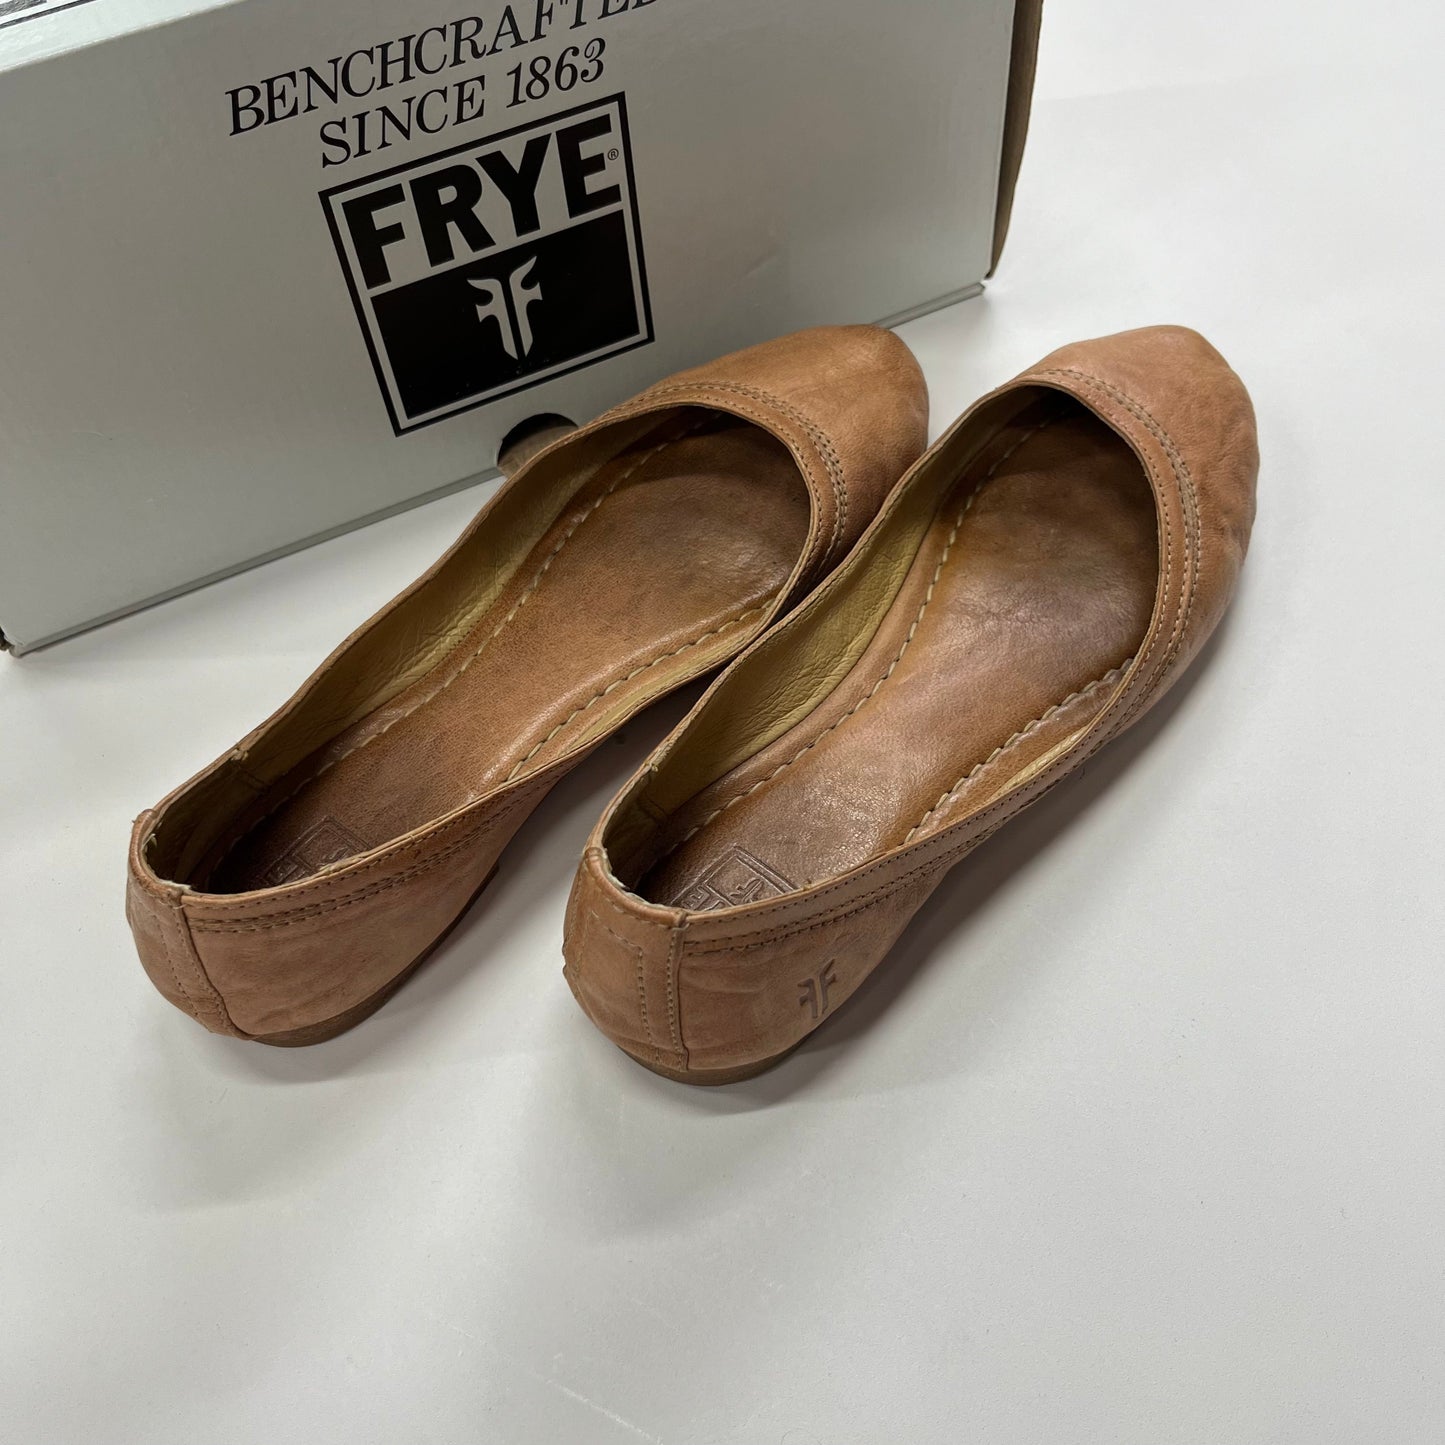 Shoes Flats Ballet By Frye  Size: 6.5